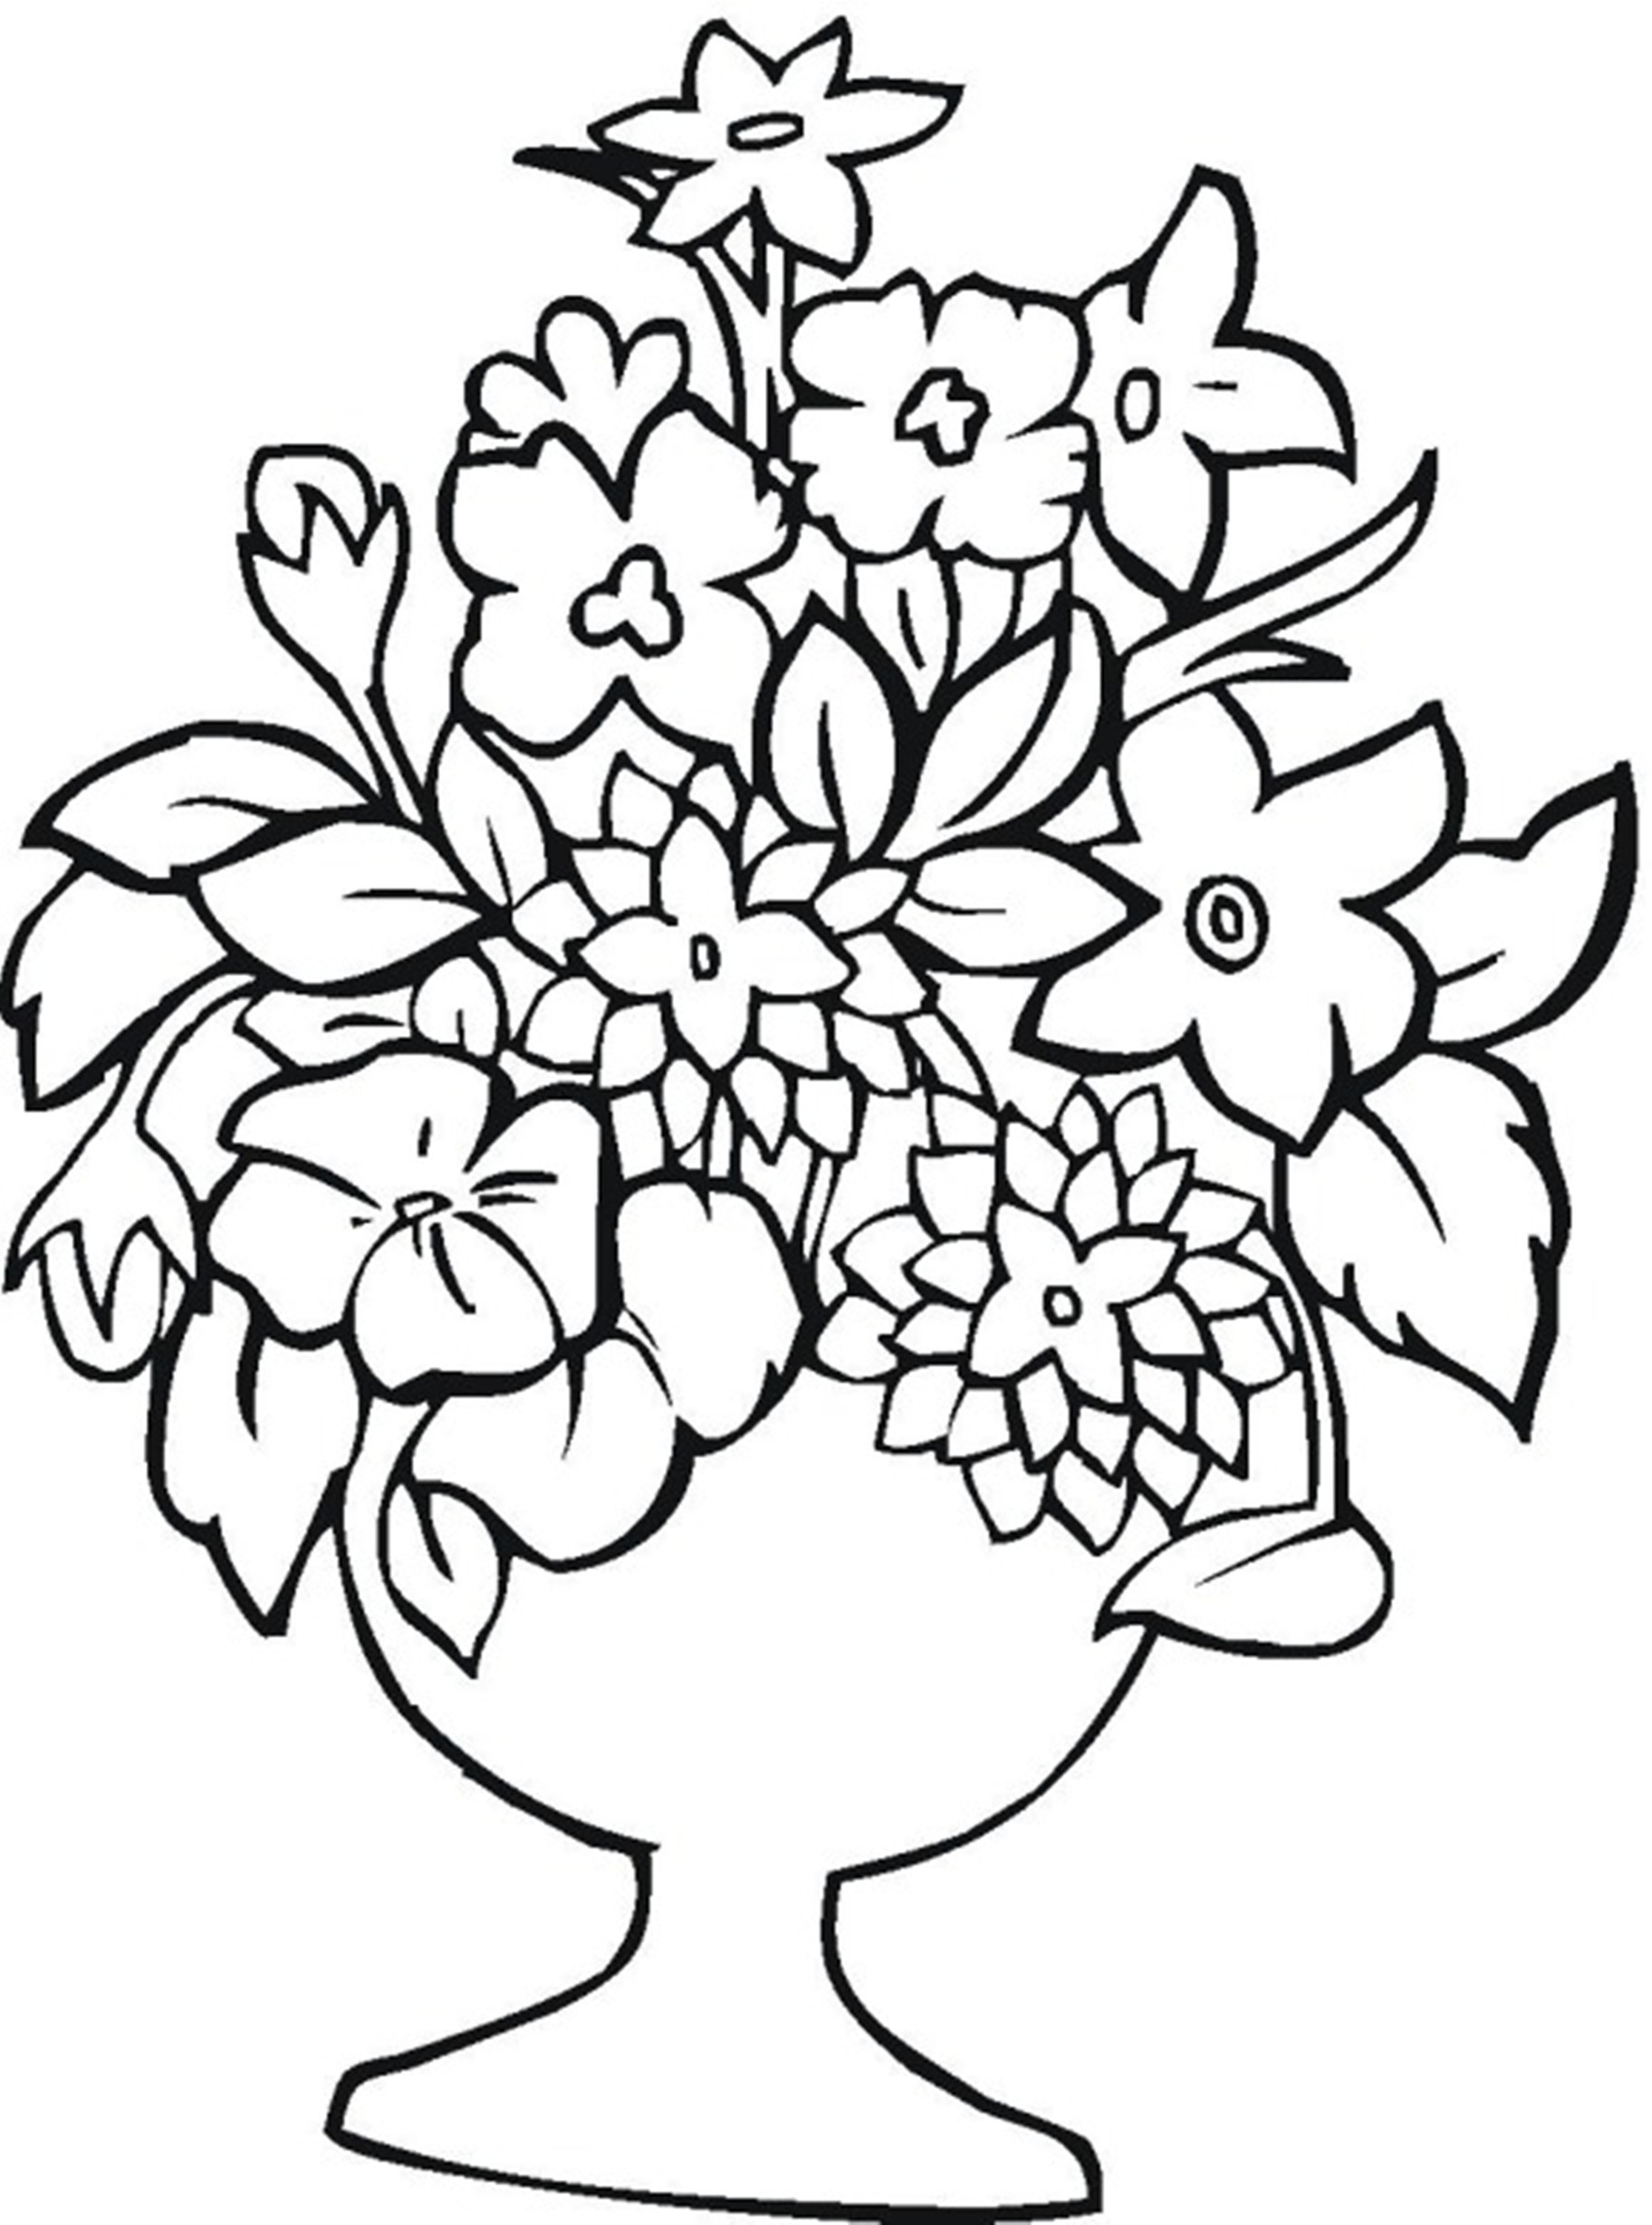 Coloring Pages For Toddlers Printable
 Free Printable Flower Coloring Pages For Kids Best